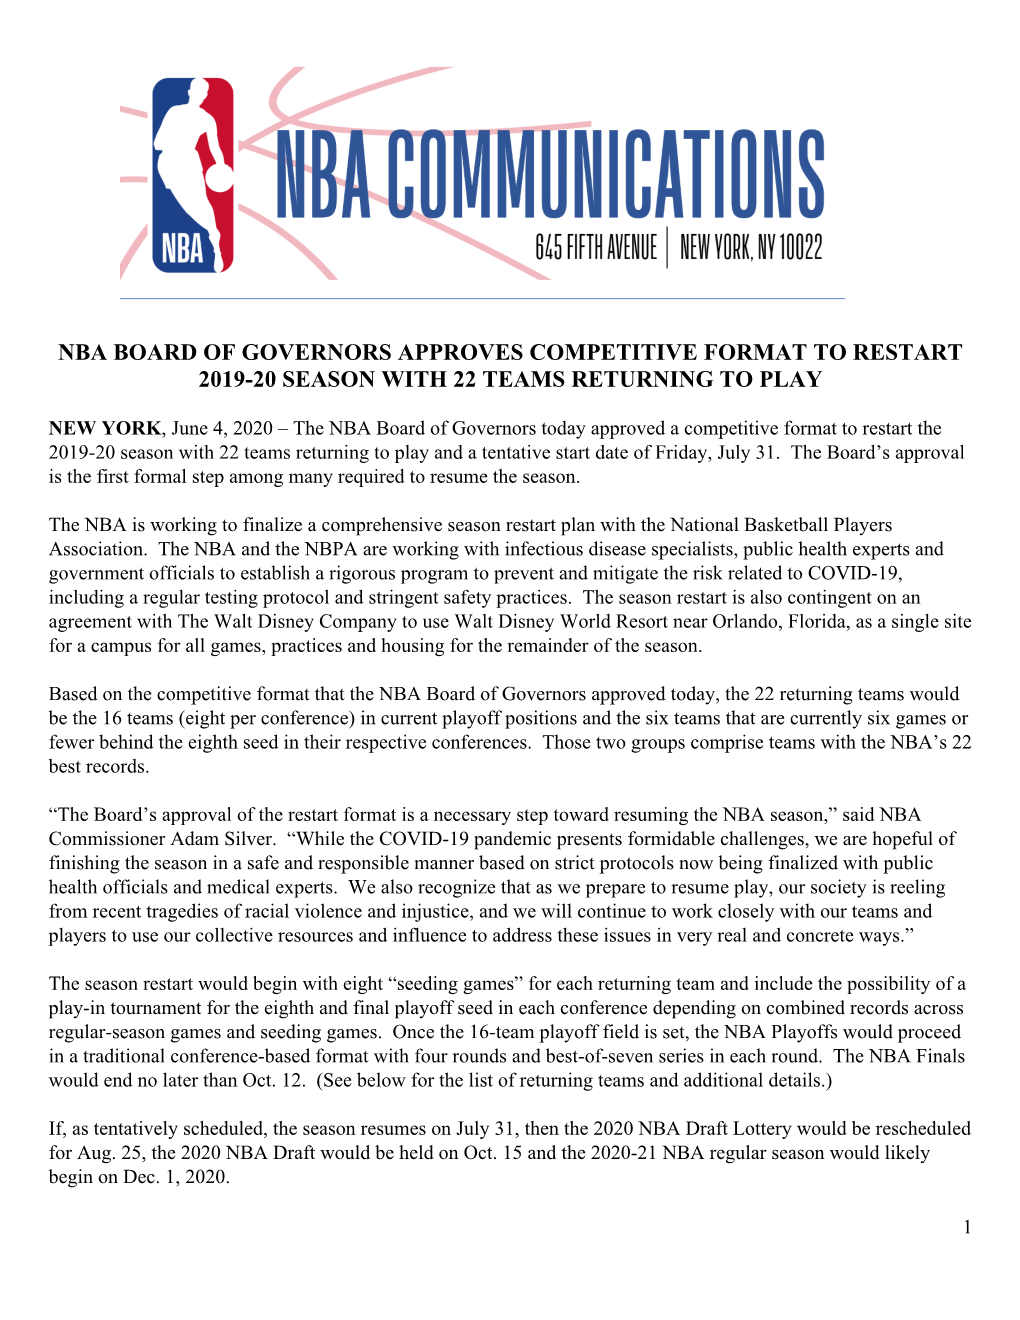 Nba Board of Governors Approves Competitive Format to Restart 2019-20 Season with 22 Teams Returning to Play